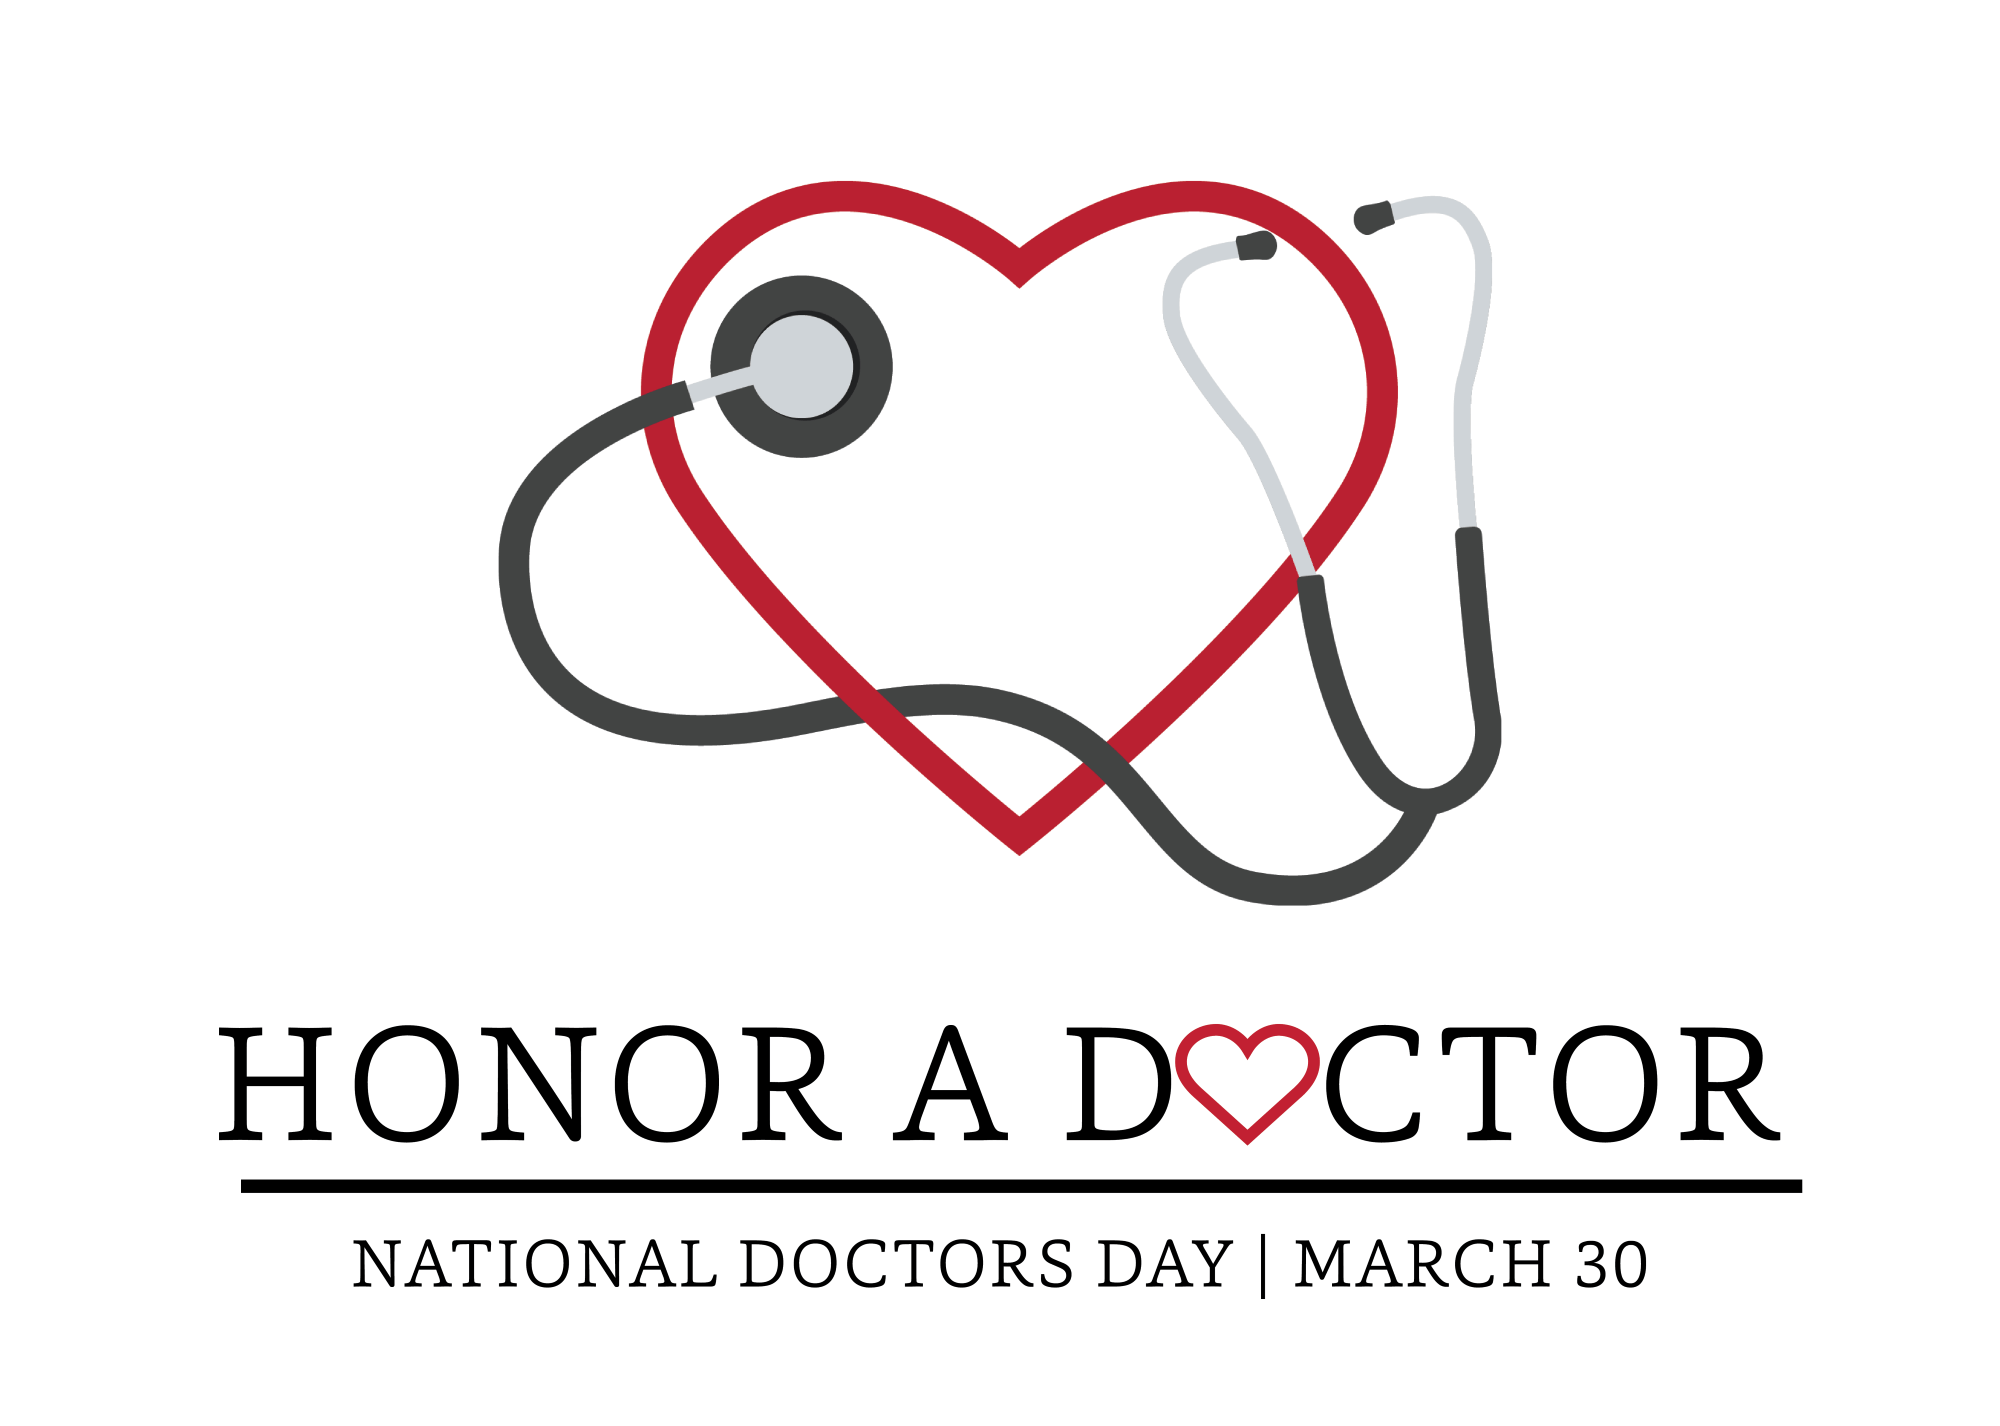 Honor a Doctor National Doctors Day March 30